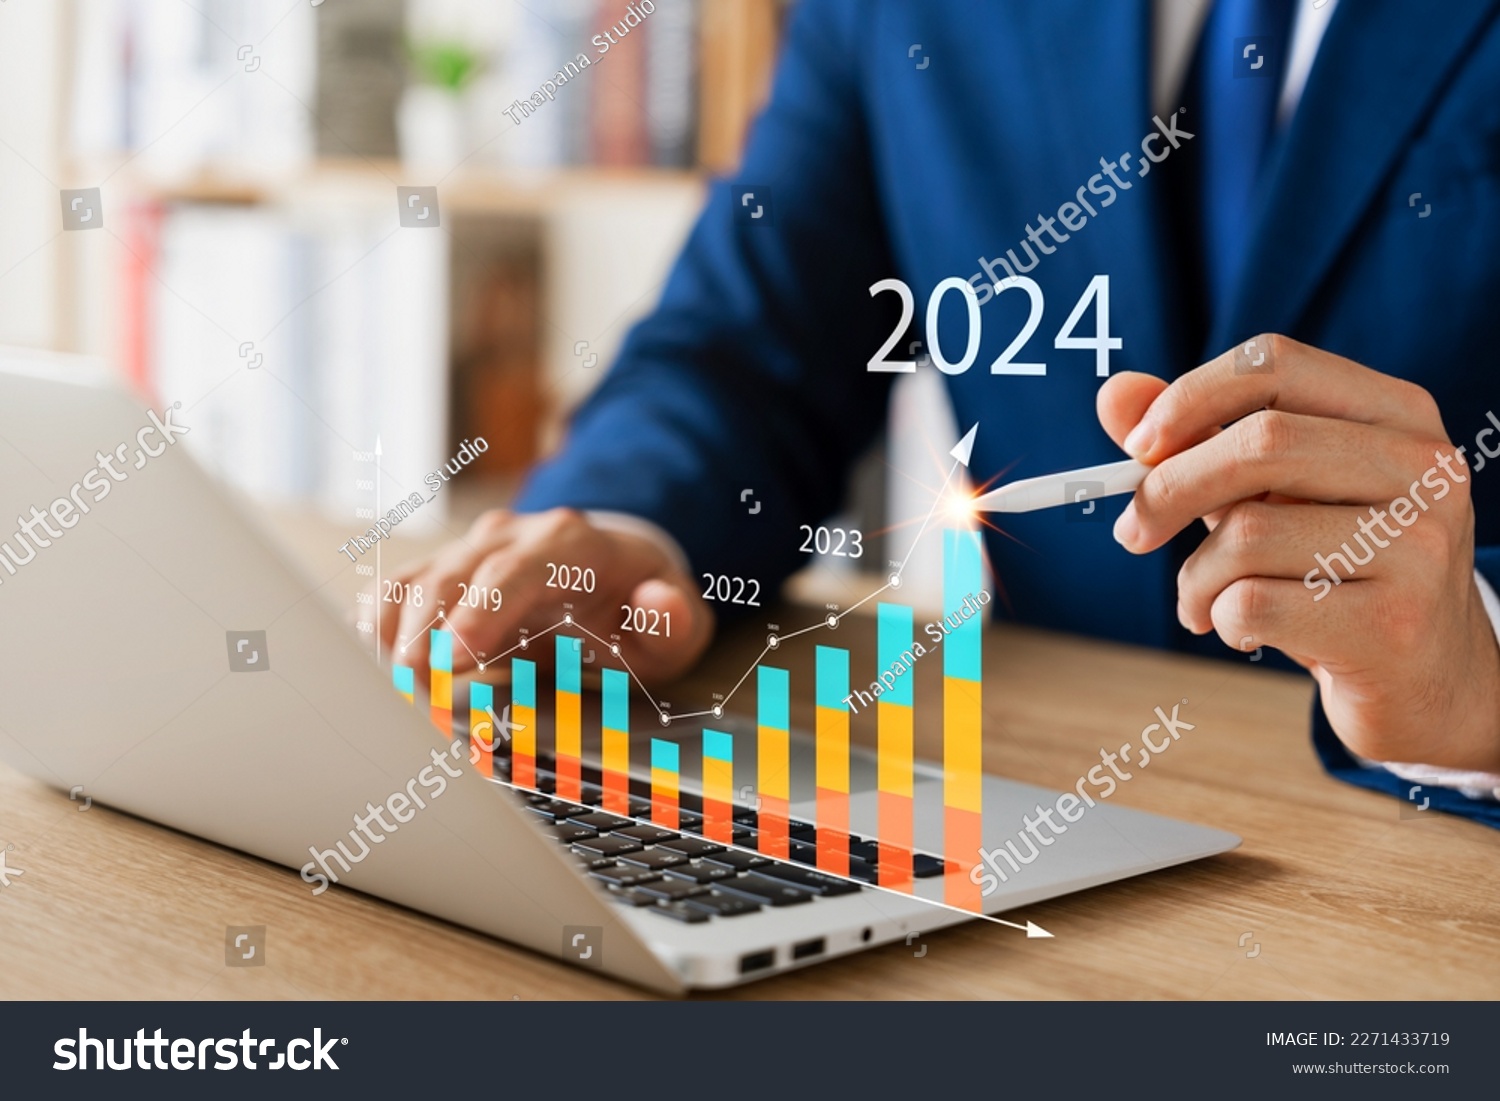 Businessman analyzes profitability of working companies with digital augmented reality graphics, positive indicators in 2024, businessman calculates financial data for long-term investments. #2271433719